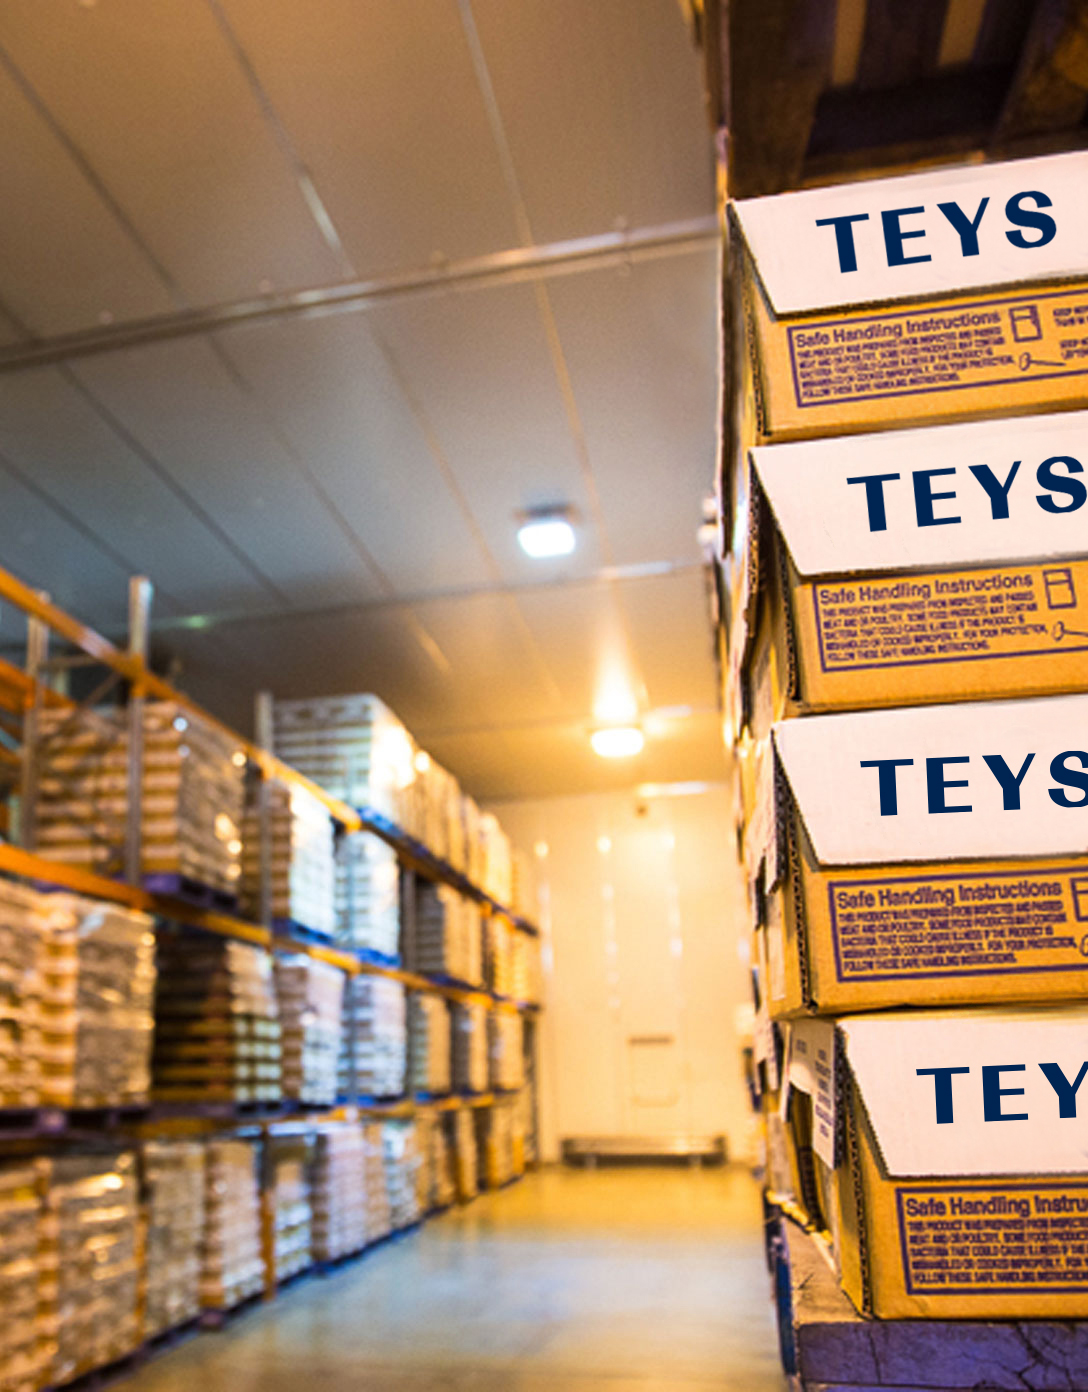 Teys Quality Management System for high quality product